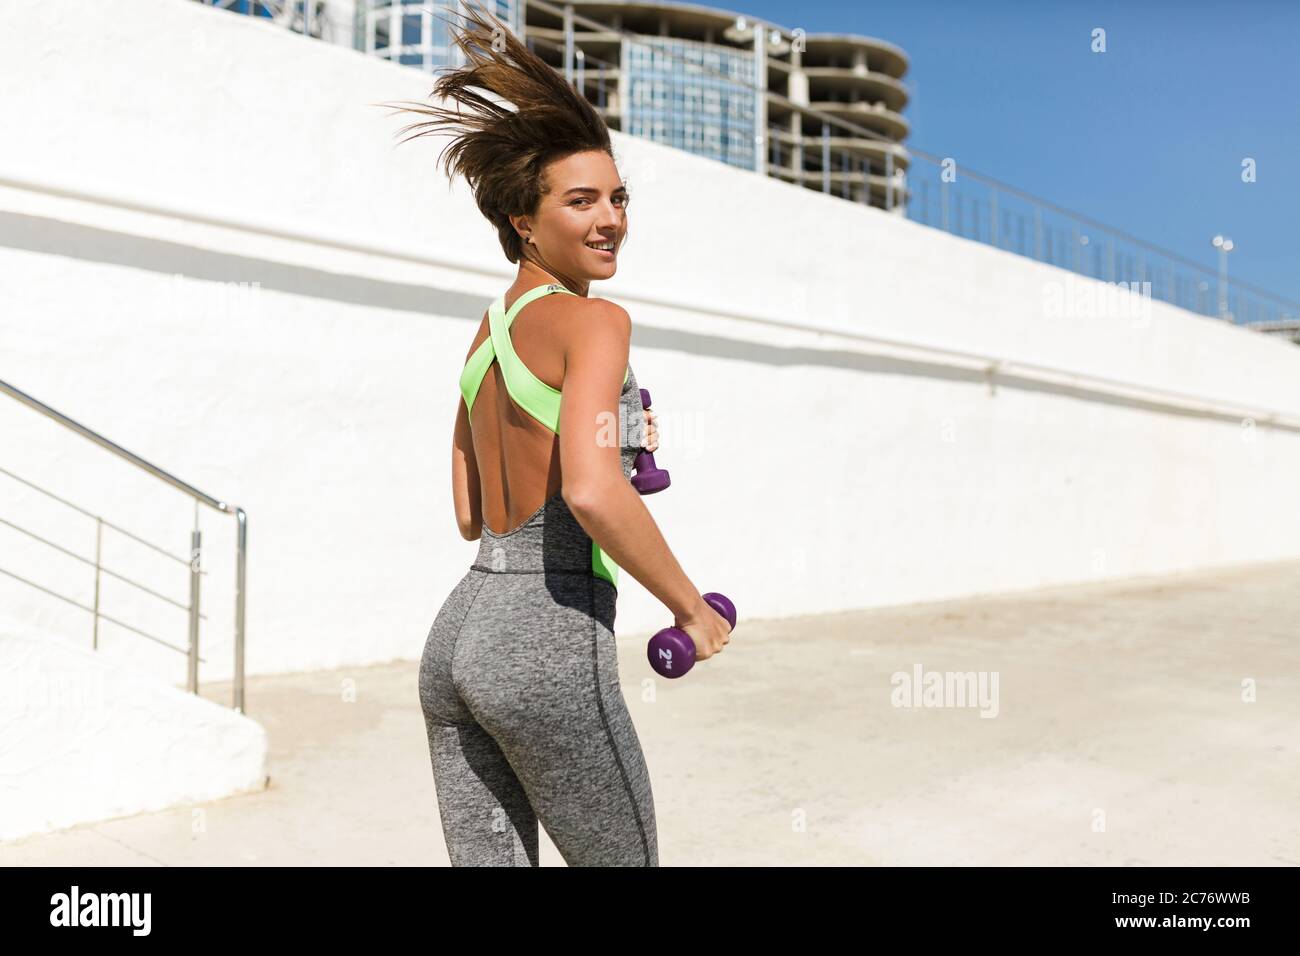 Beautiful woman in modern sport suit holding dumbbells and jogging joyfully looking in camera Stock Photo